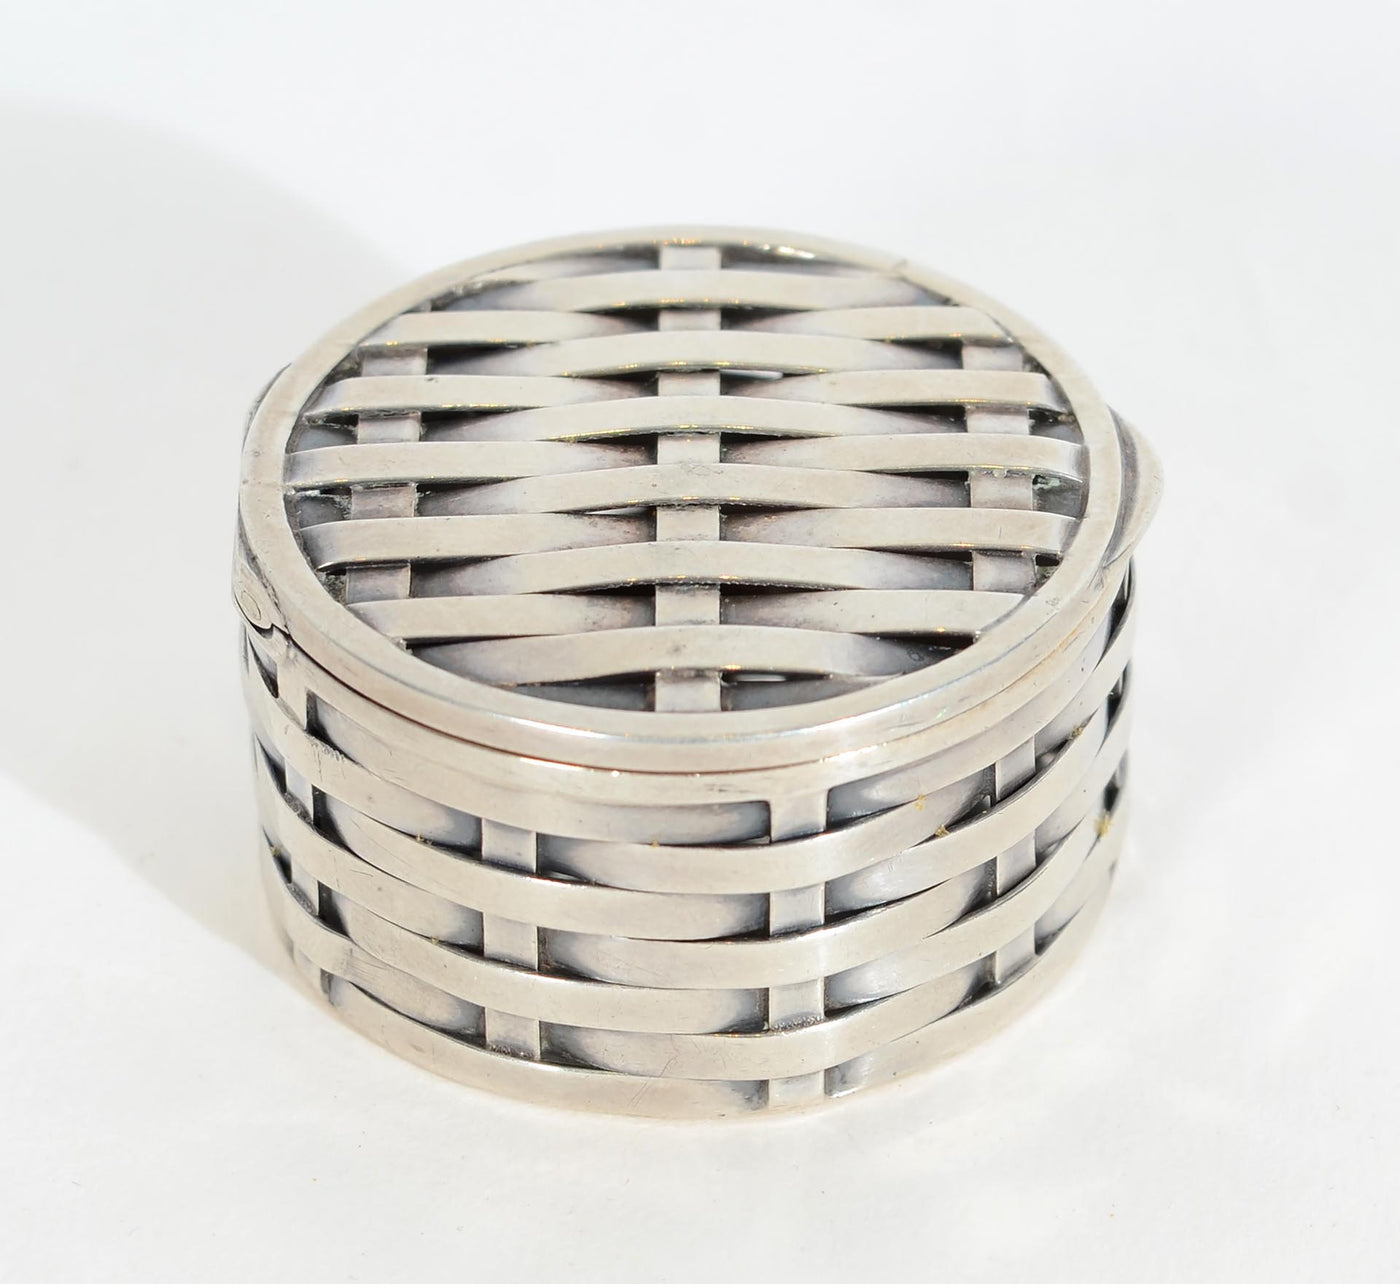 woven-sterling-silver-round-box-product-1339923